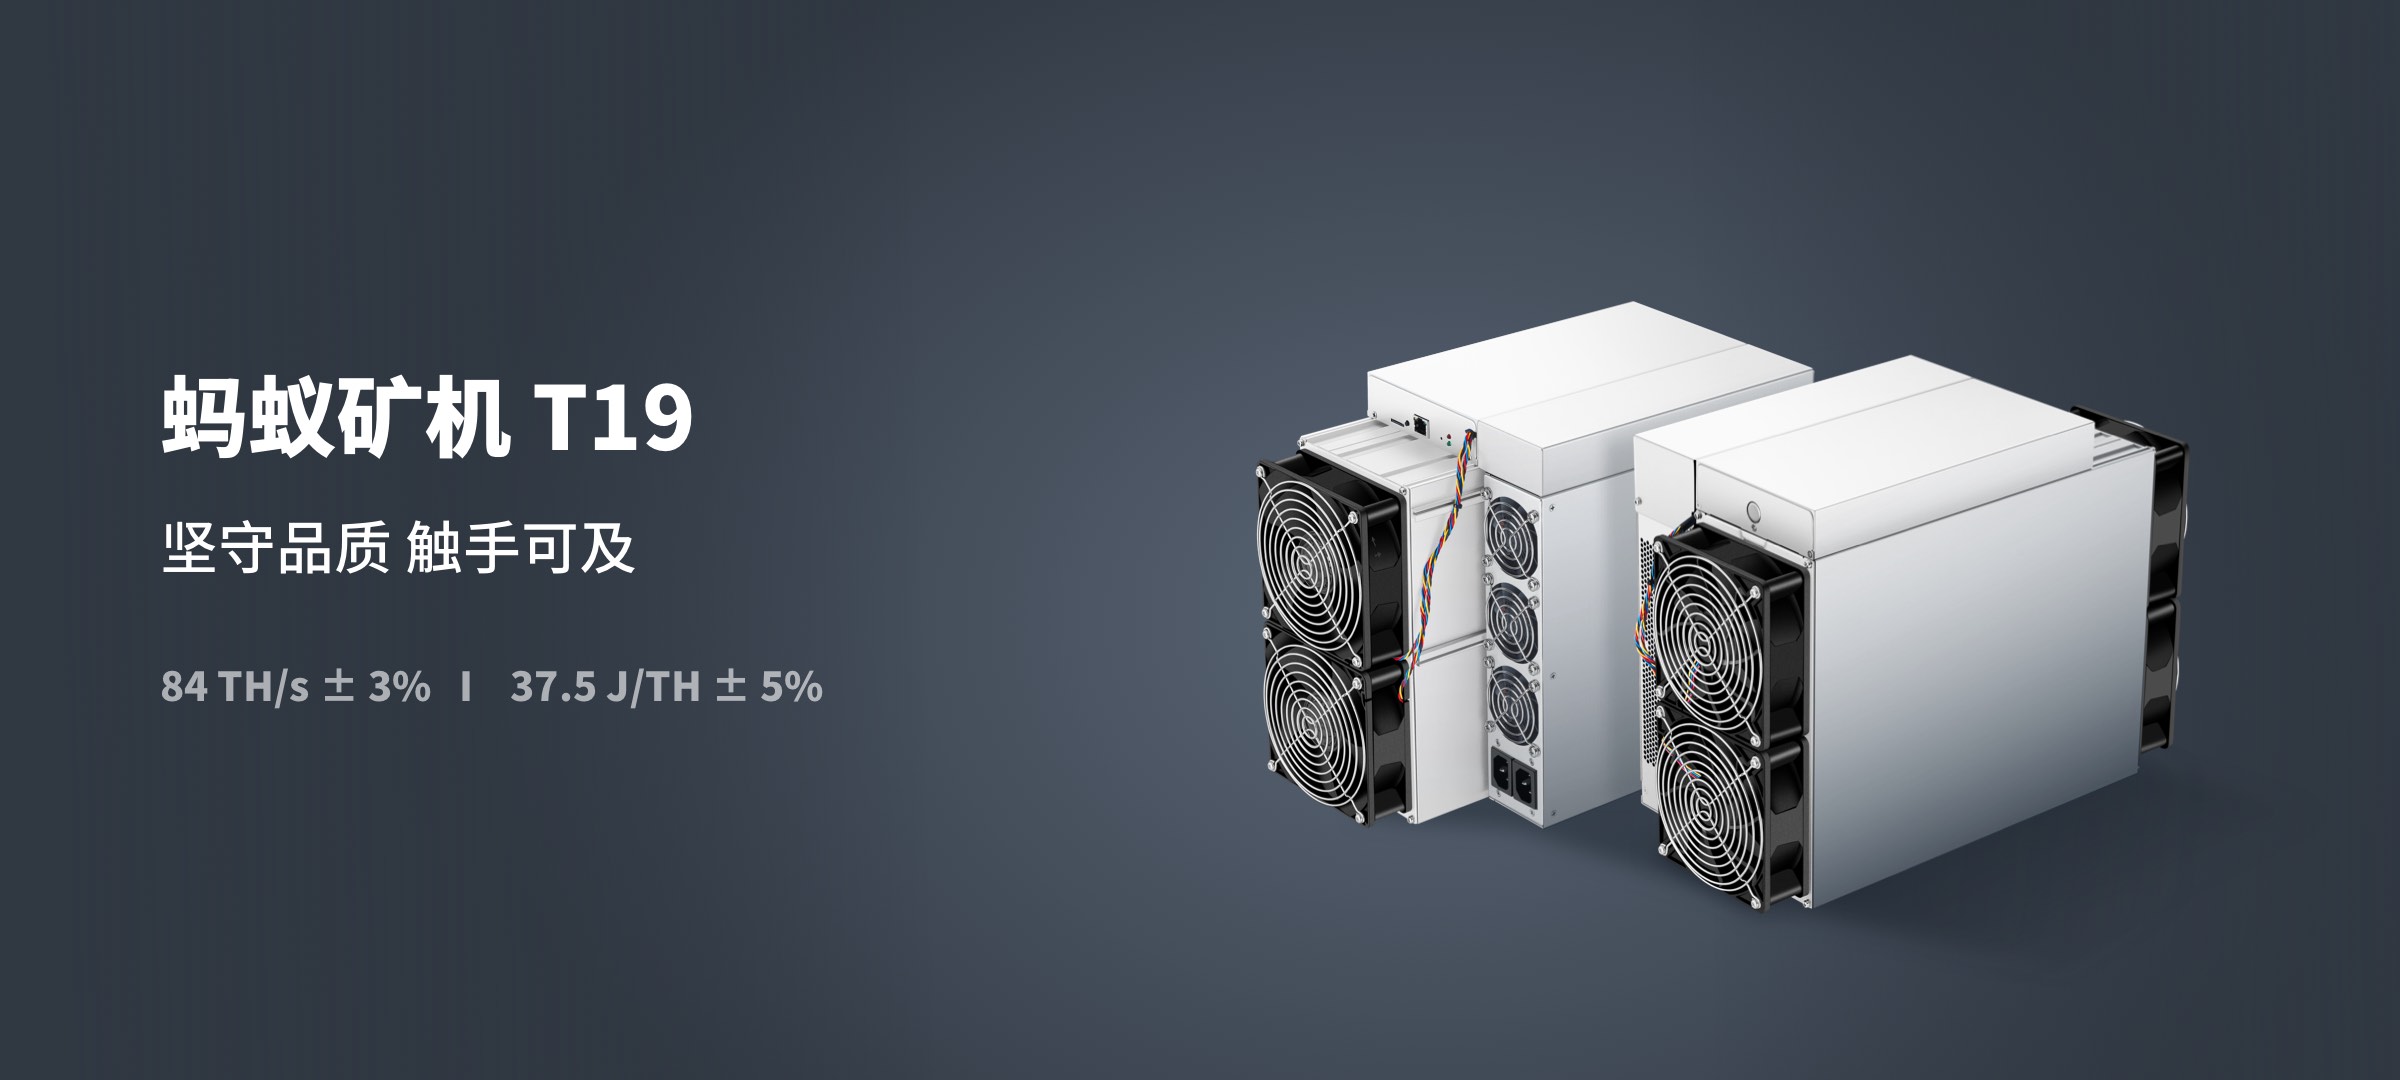 Antminer s21 hydro 335 th s. Antminer t19 Hydro. S19 Antminer с водоблоками. Bitmain t19 84 th/s. Antminer s19 86th.